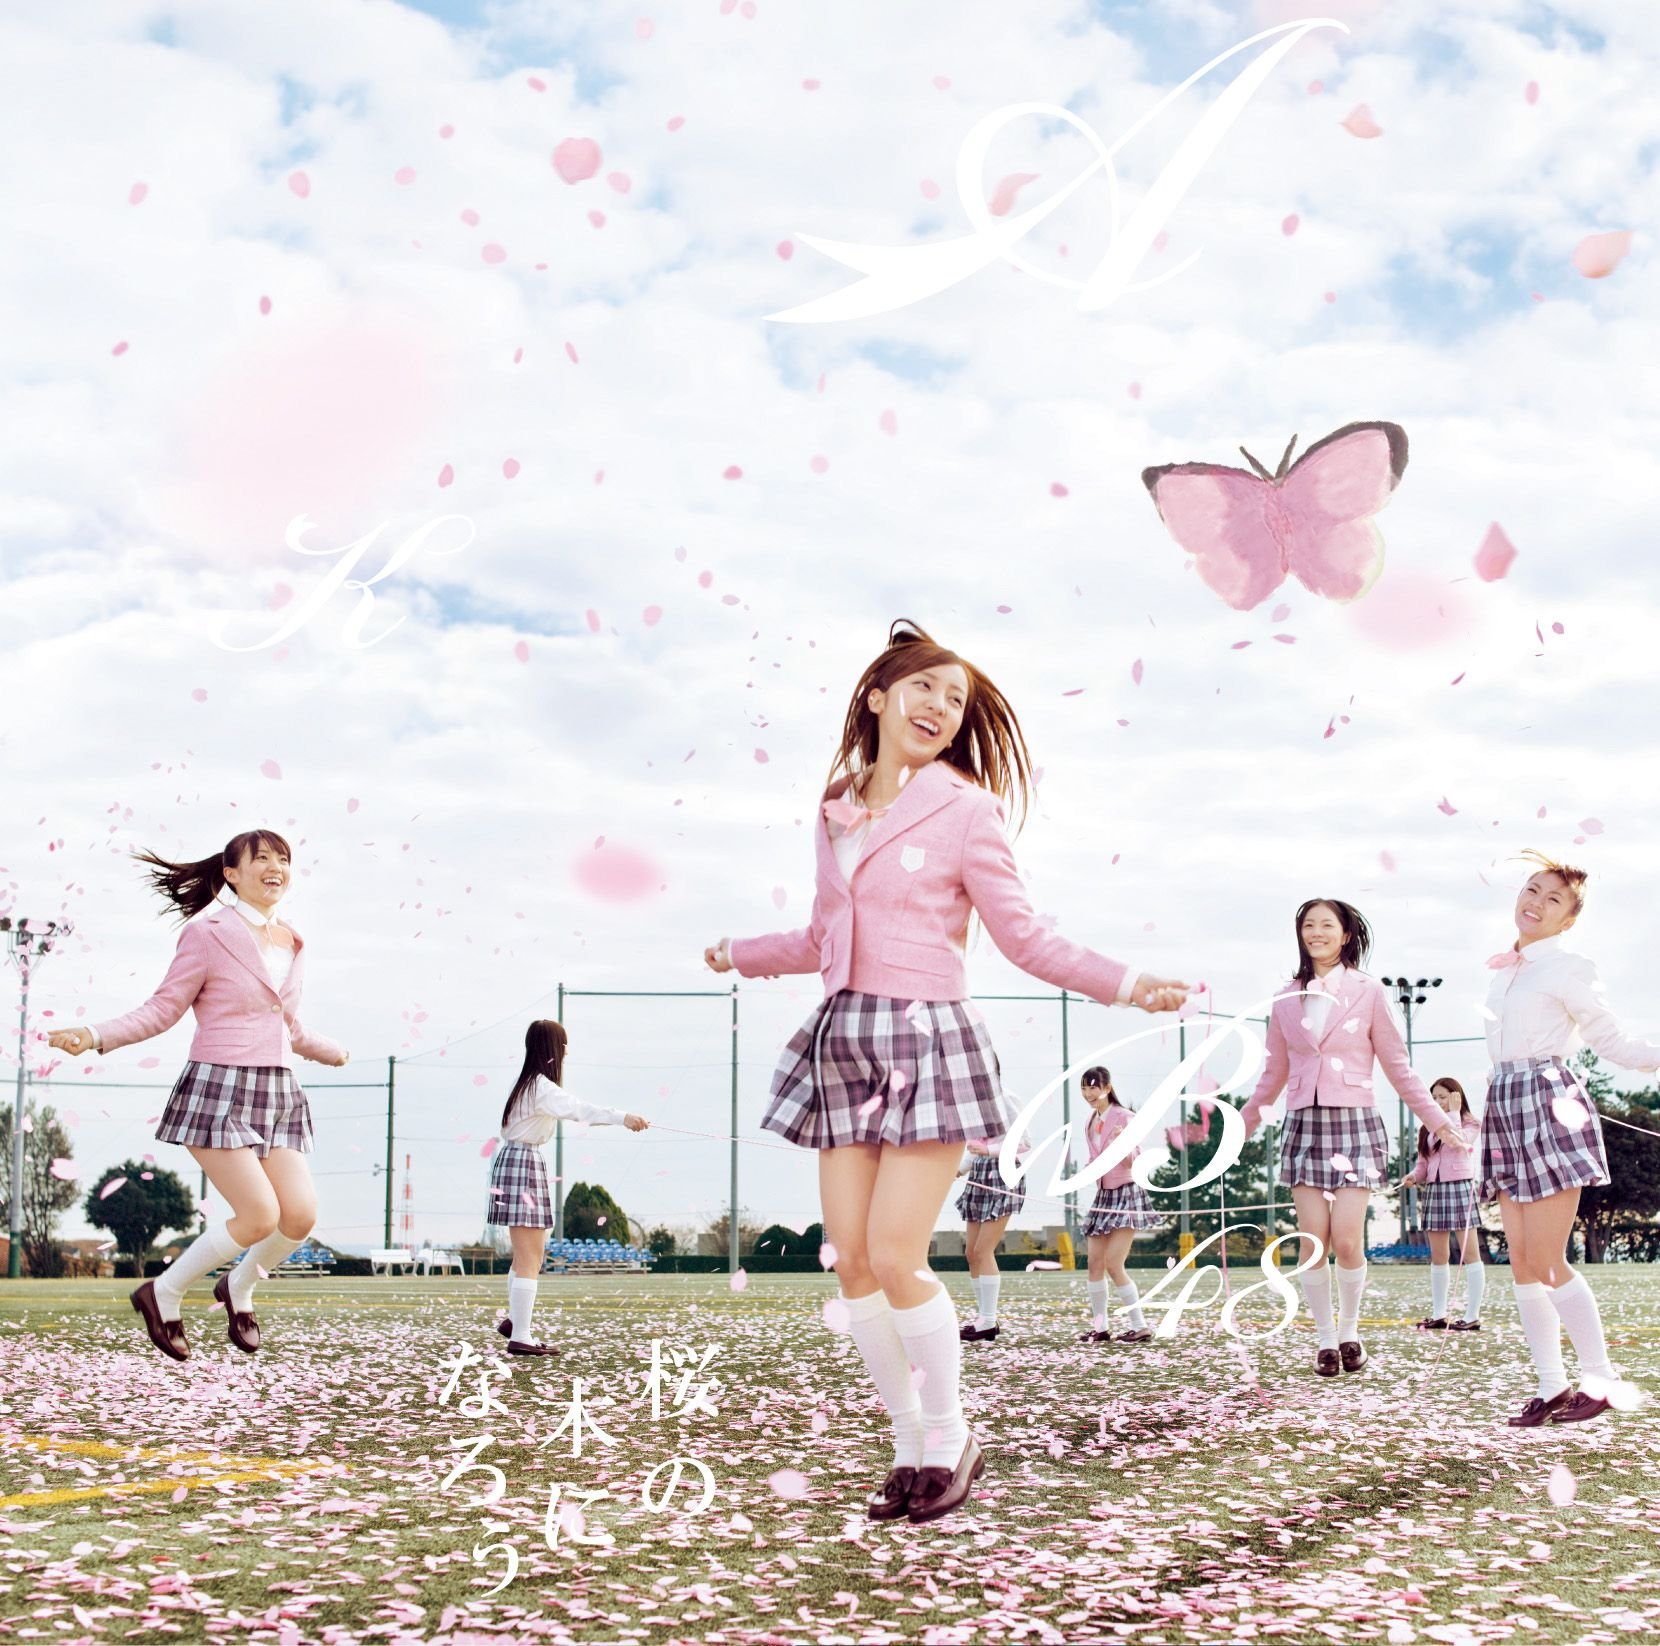 AKB48 will release sakura (cherry blossom) song as their 30th single on February 20th !